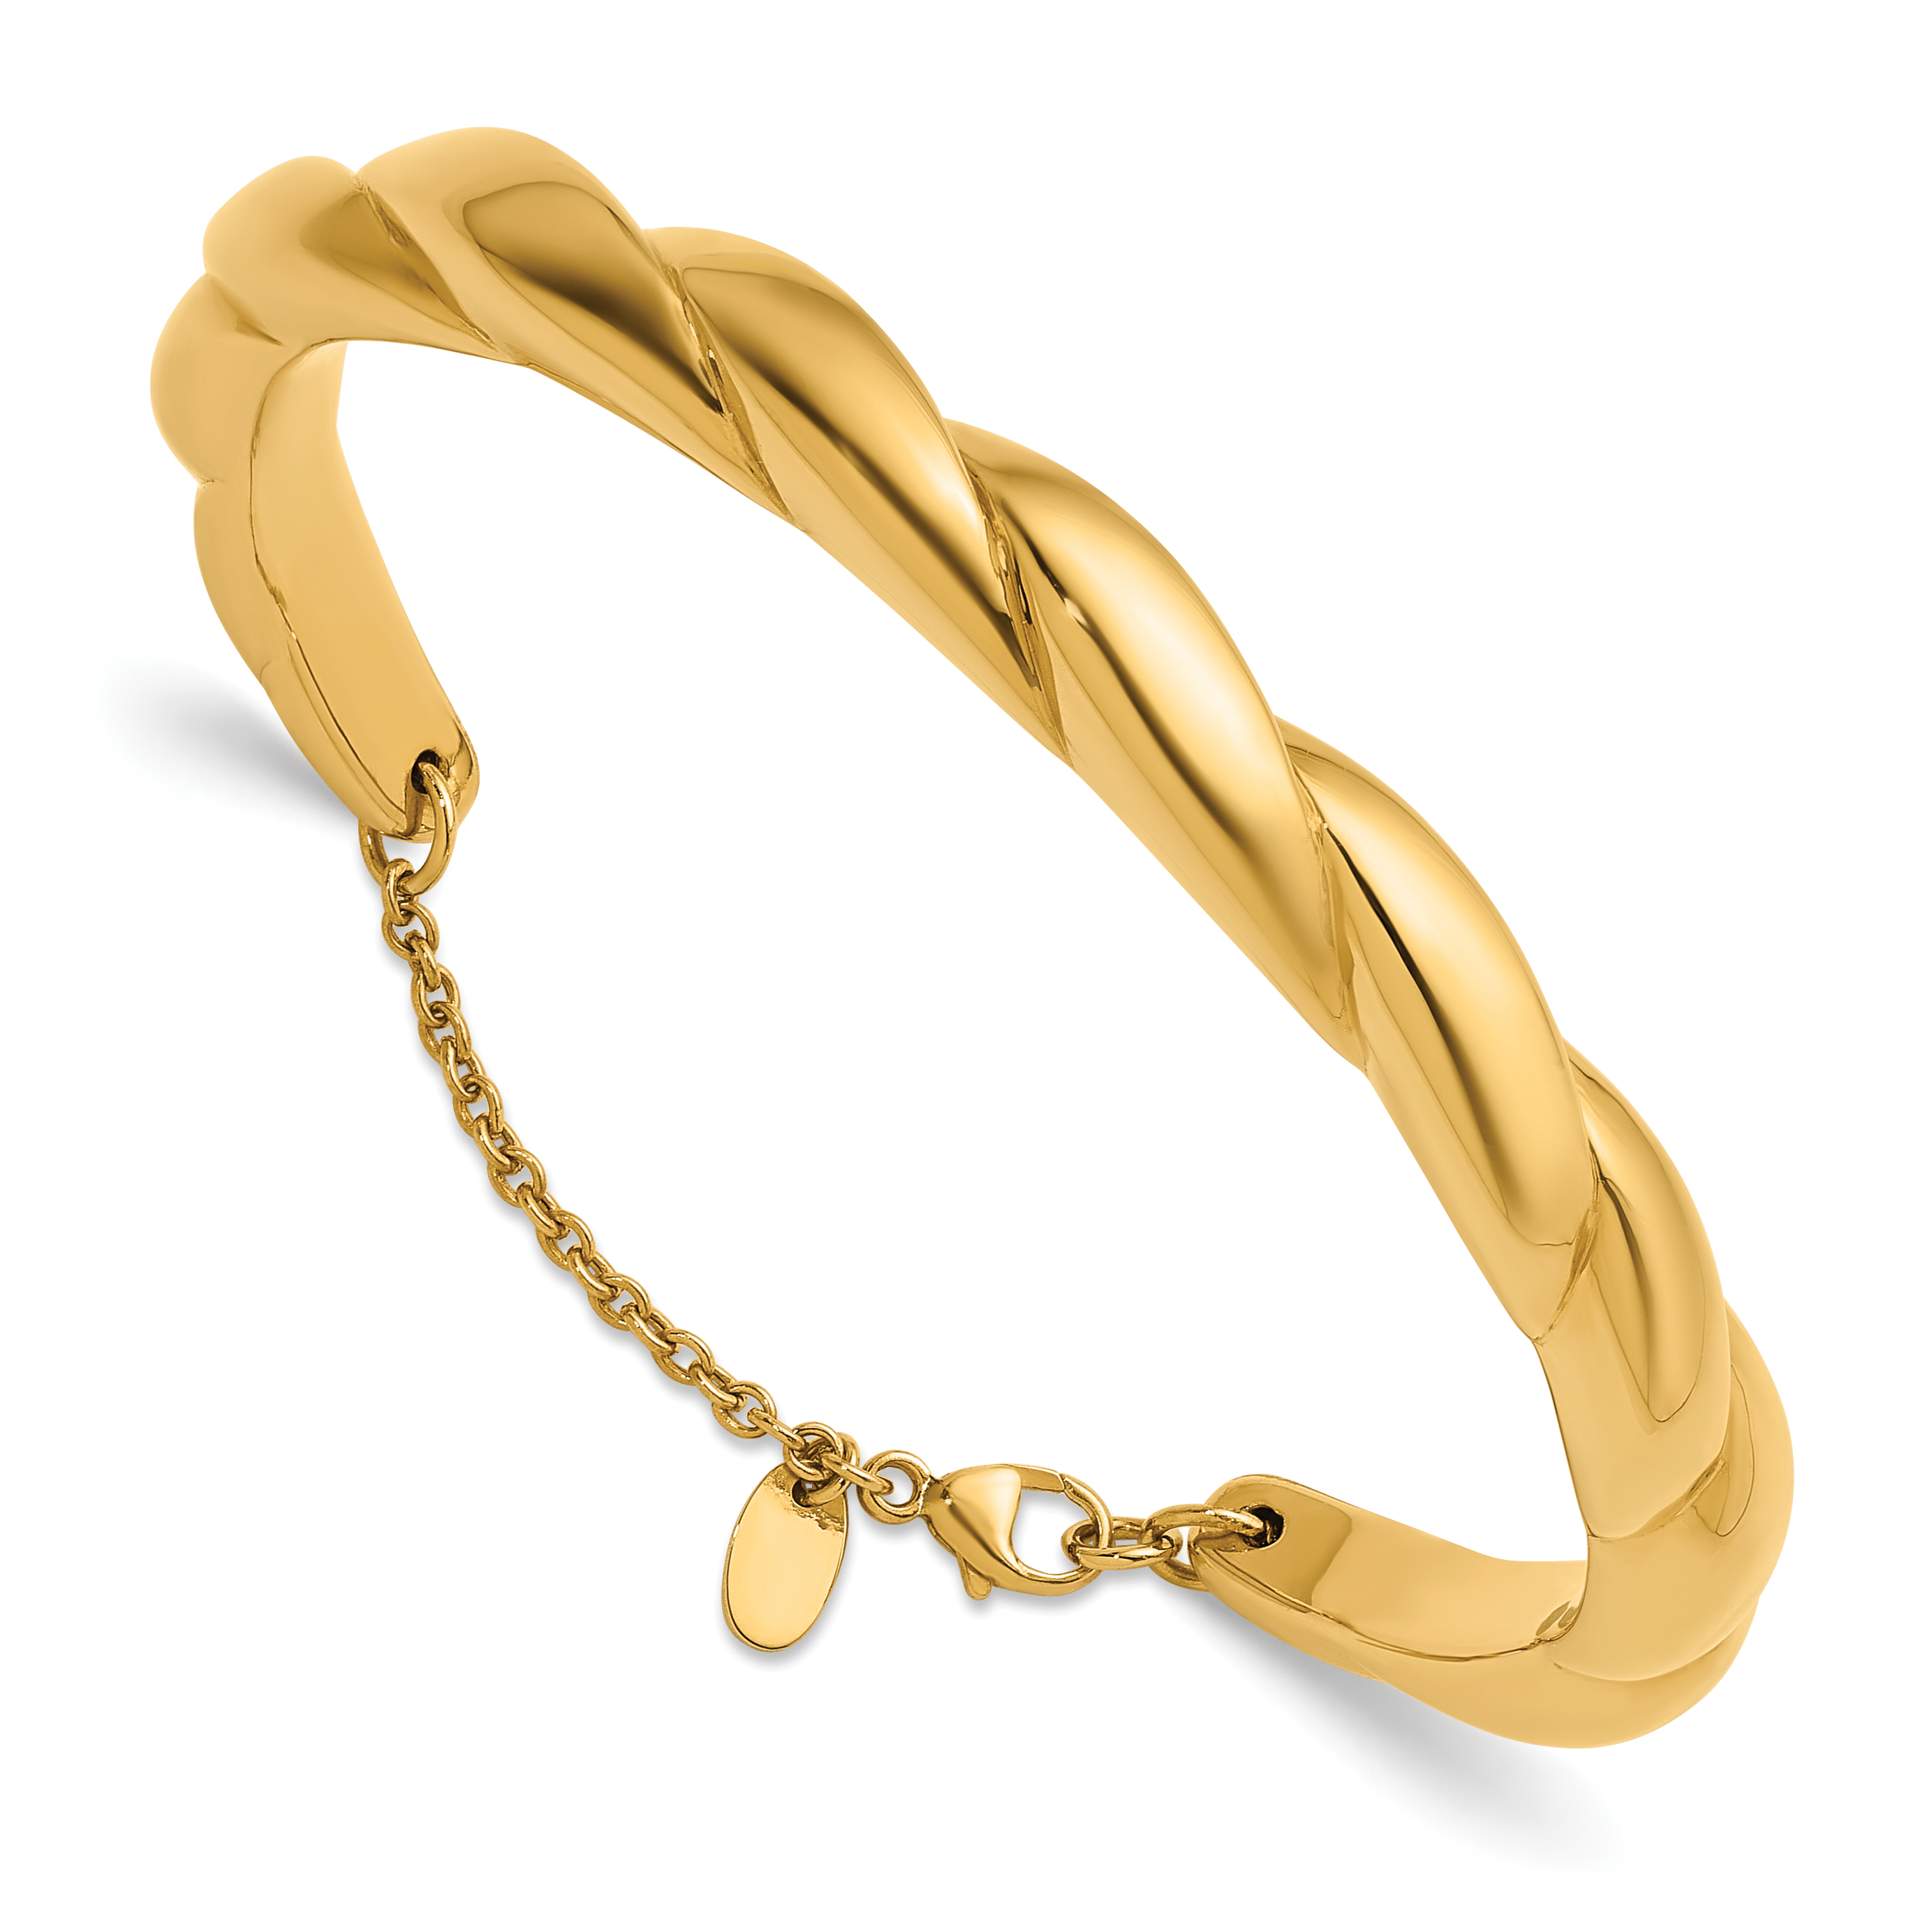 Shahi Jewelry California - Men's Chunky Link Solid Gold Bracelet in 18k  Yellow